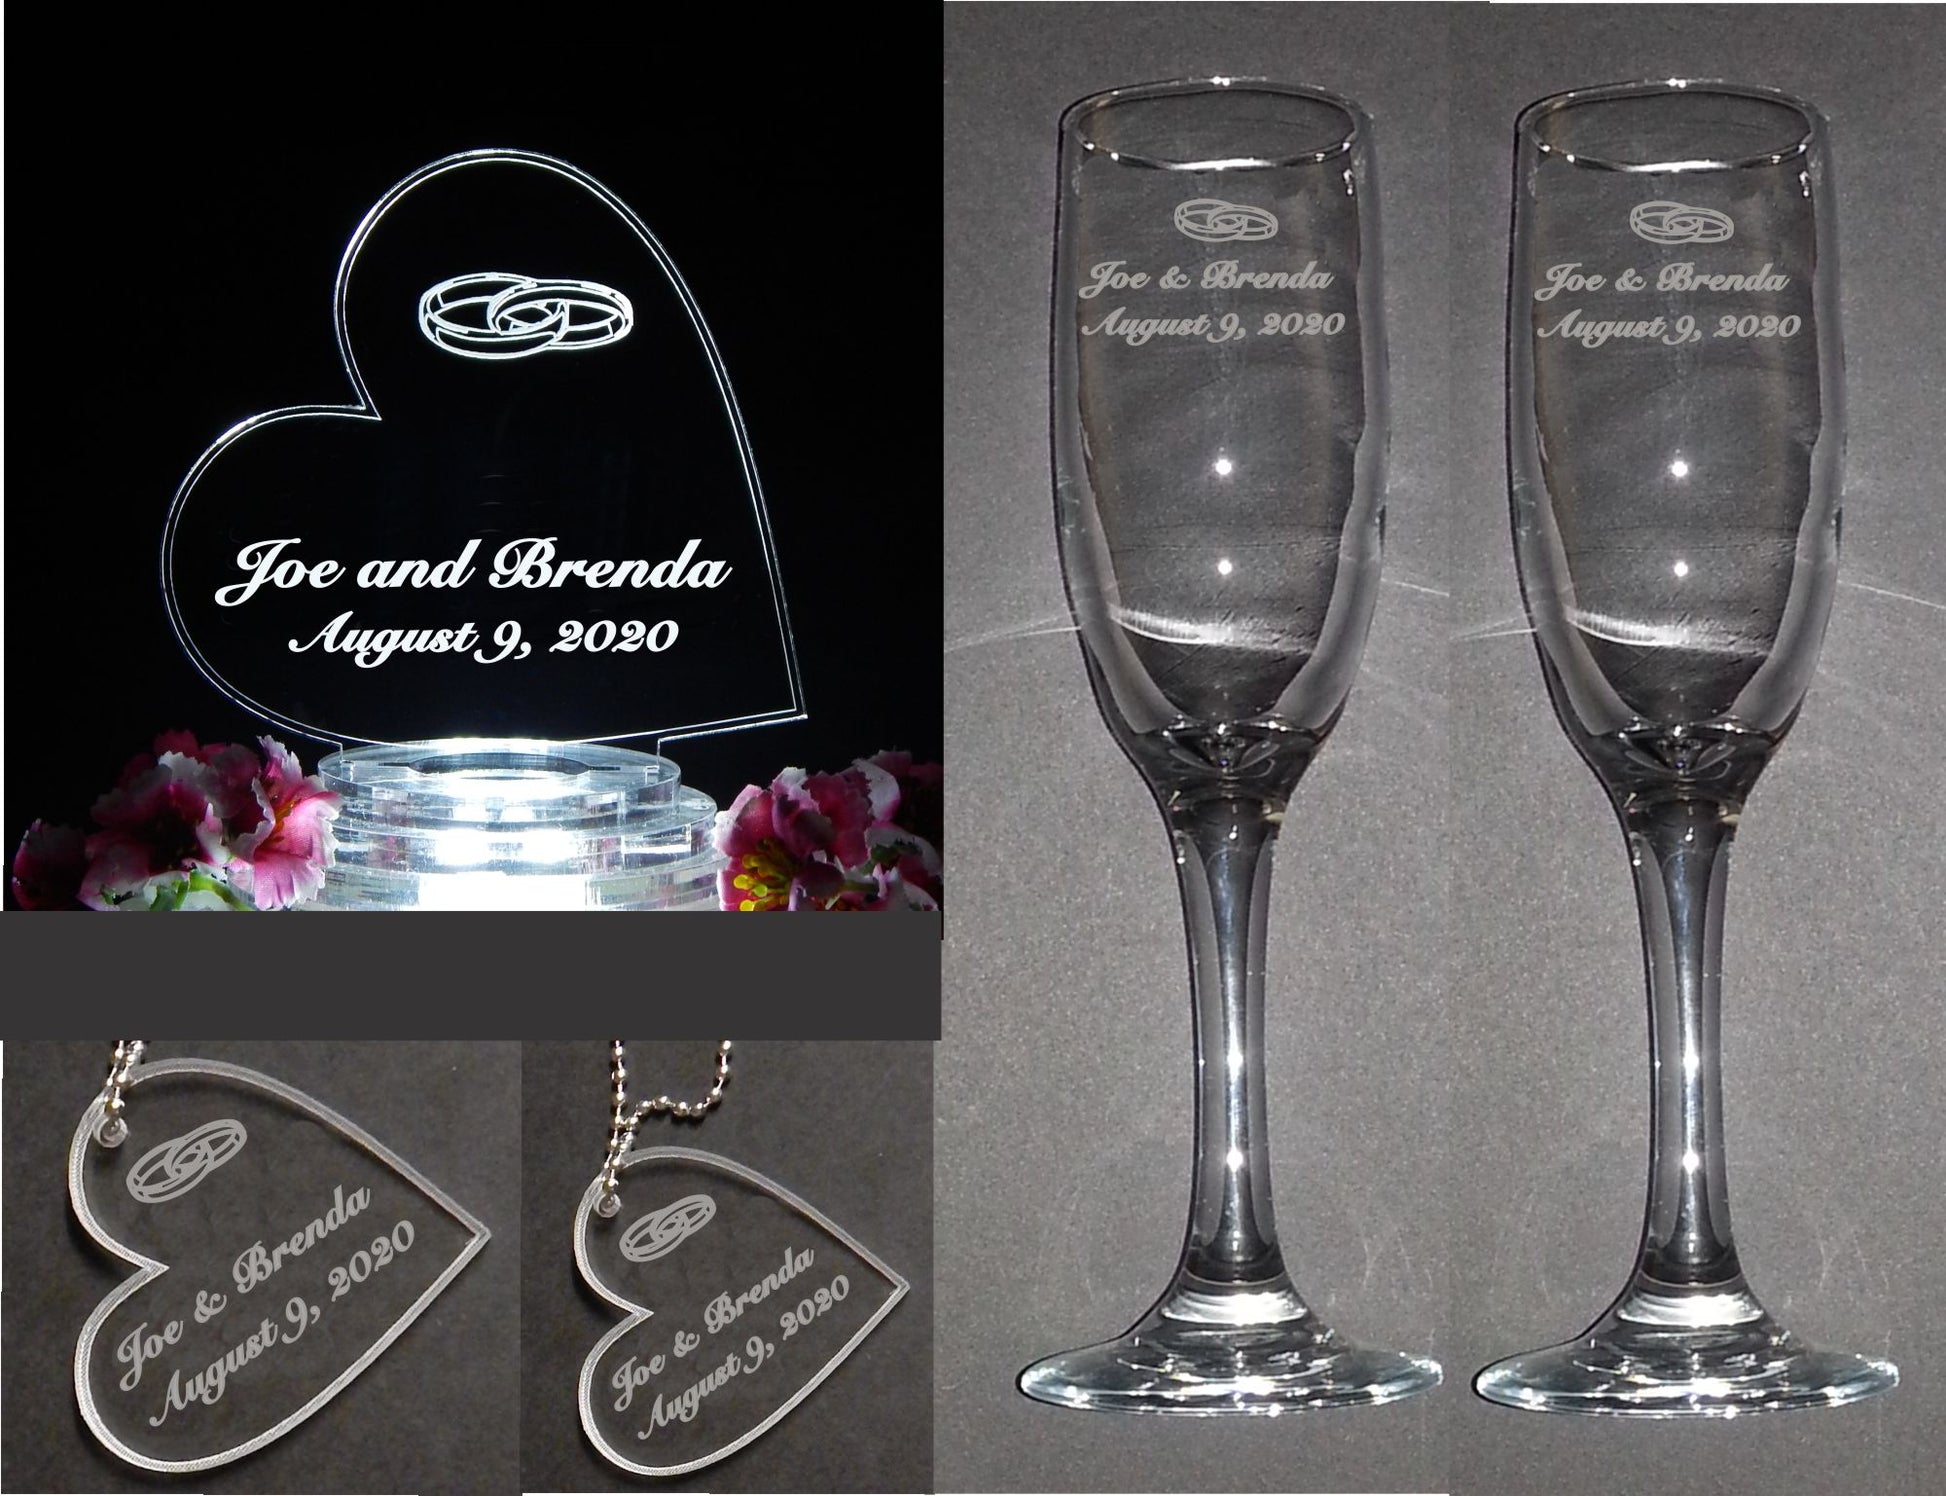 photo showing an acrylic side heart shaped cake topper designed with wedding rings, two sizes of matching heart keychain, and a set of two champagne flutes engraved with names, date and wedding rigns